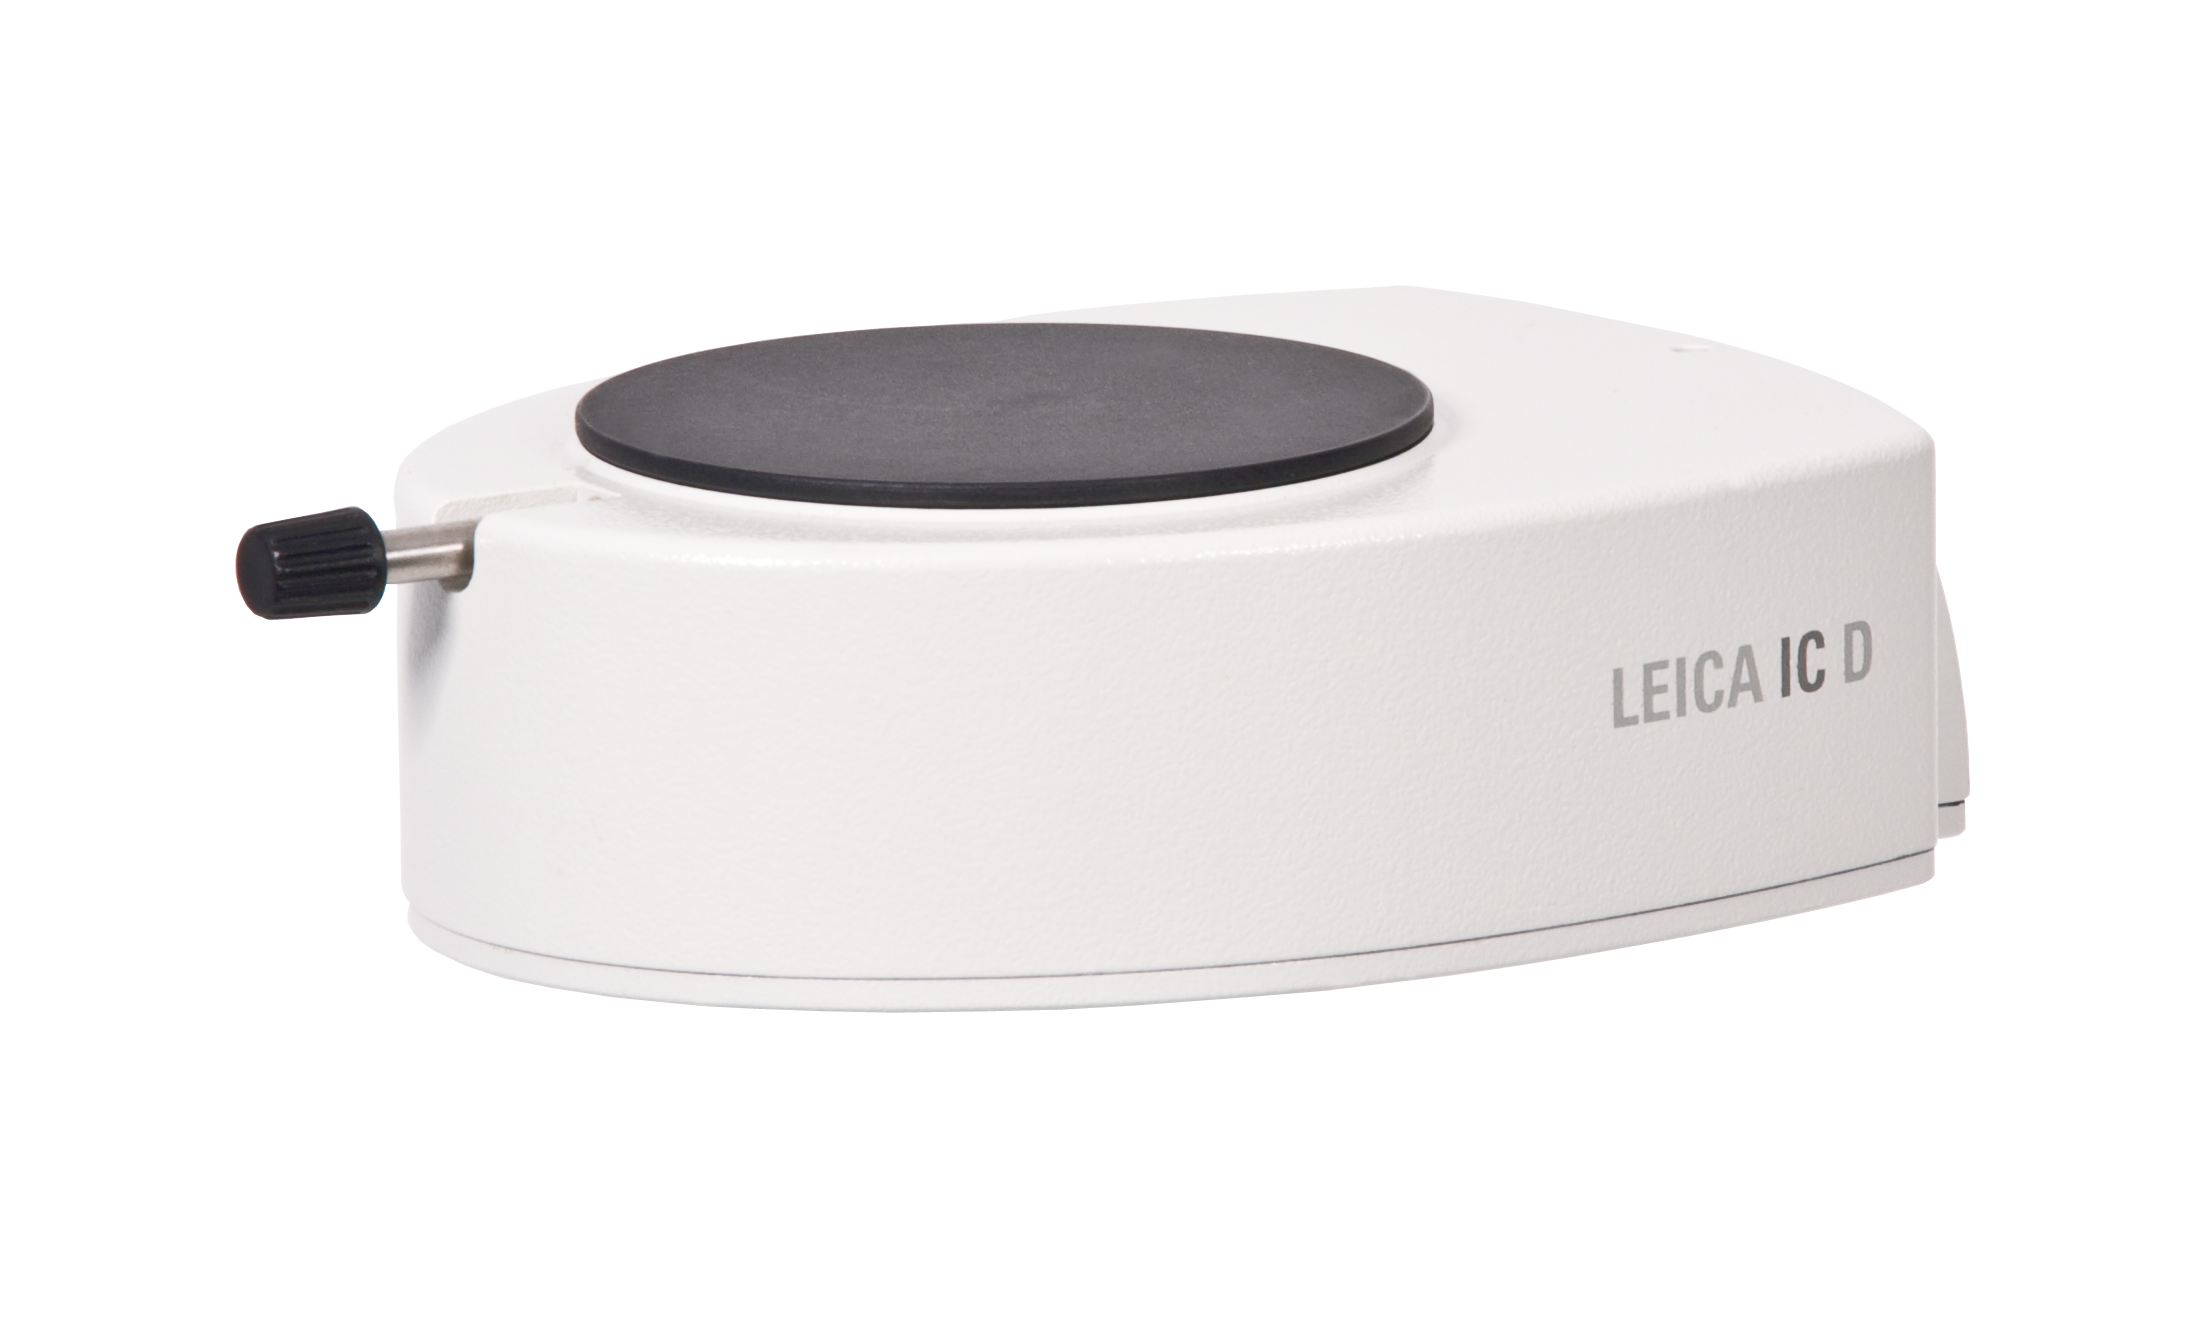 The Leica IC D is a powerful, ergonomic, and cost-effective solution for professional digital microphotography.